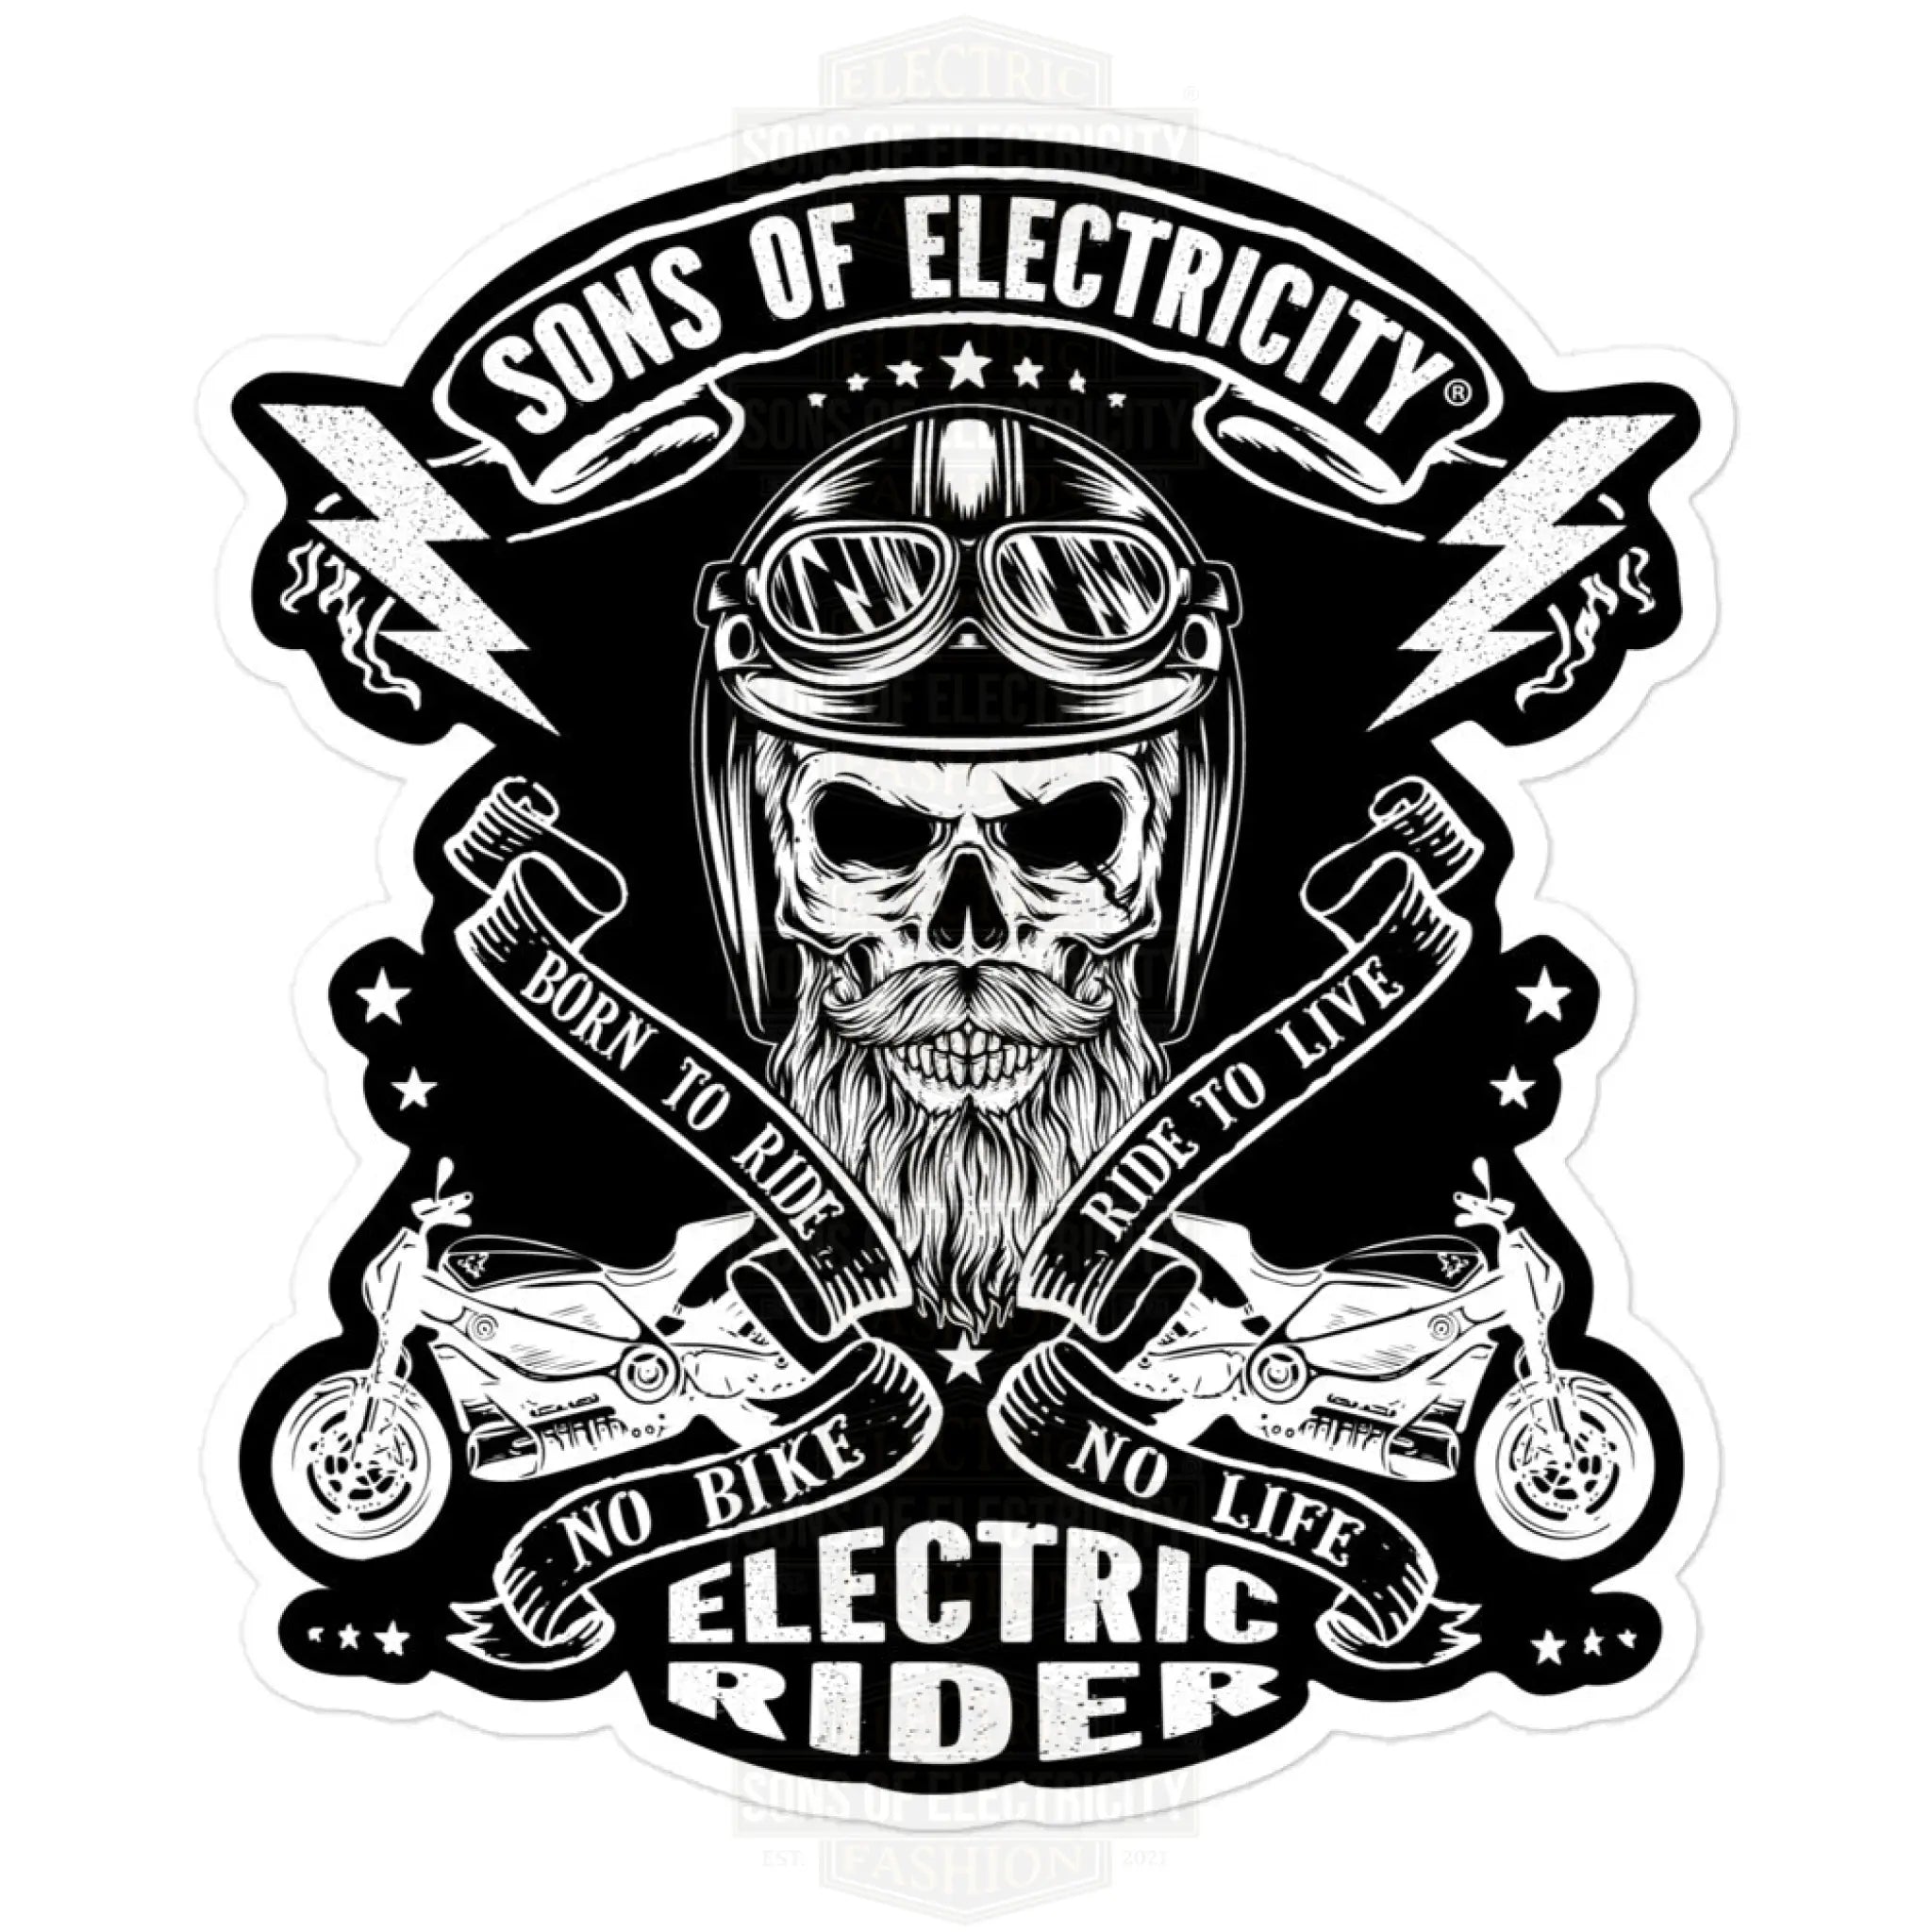 E-Motorrad Aufkleber: SONS OF ELECTRICITY Electric Rider - SONS OF